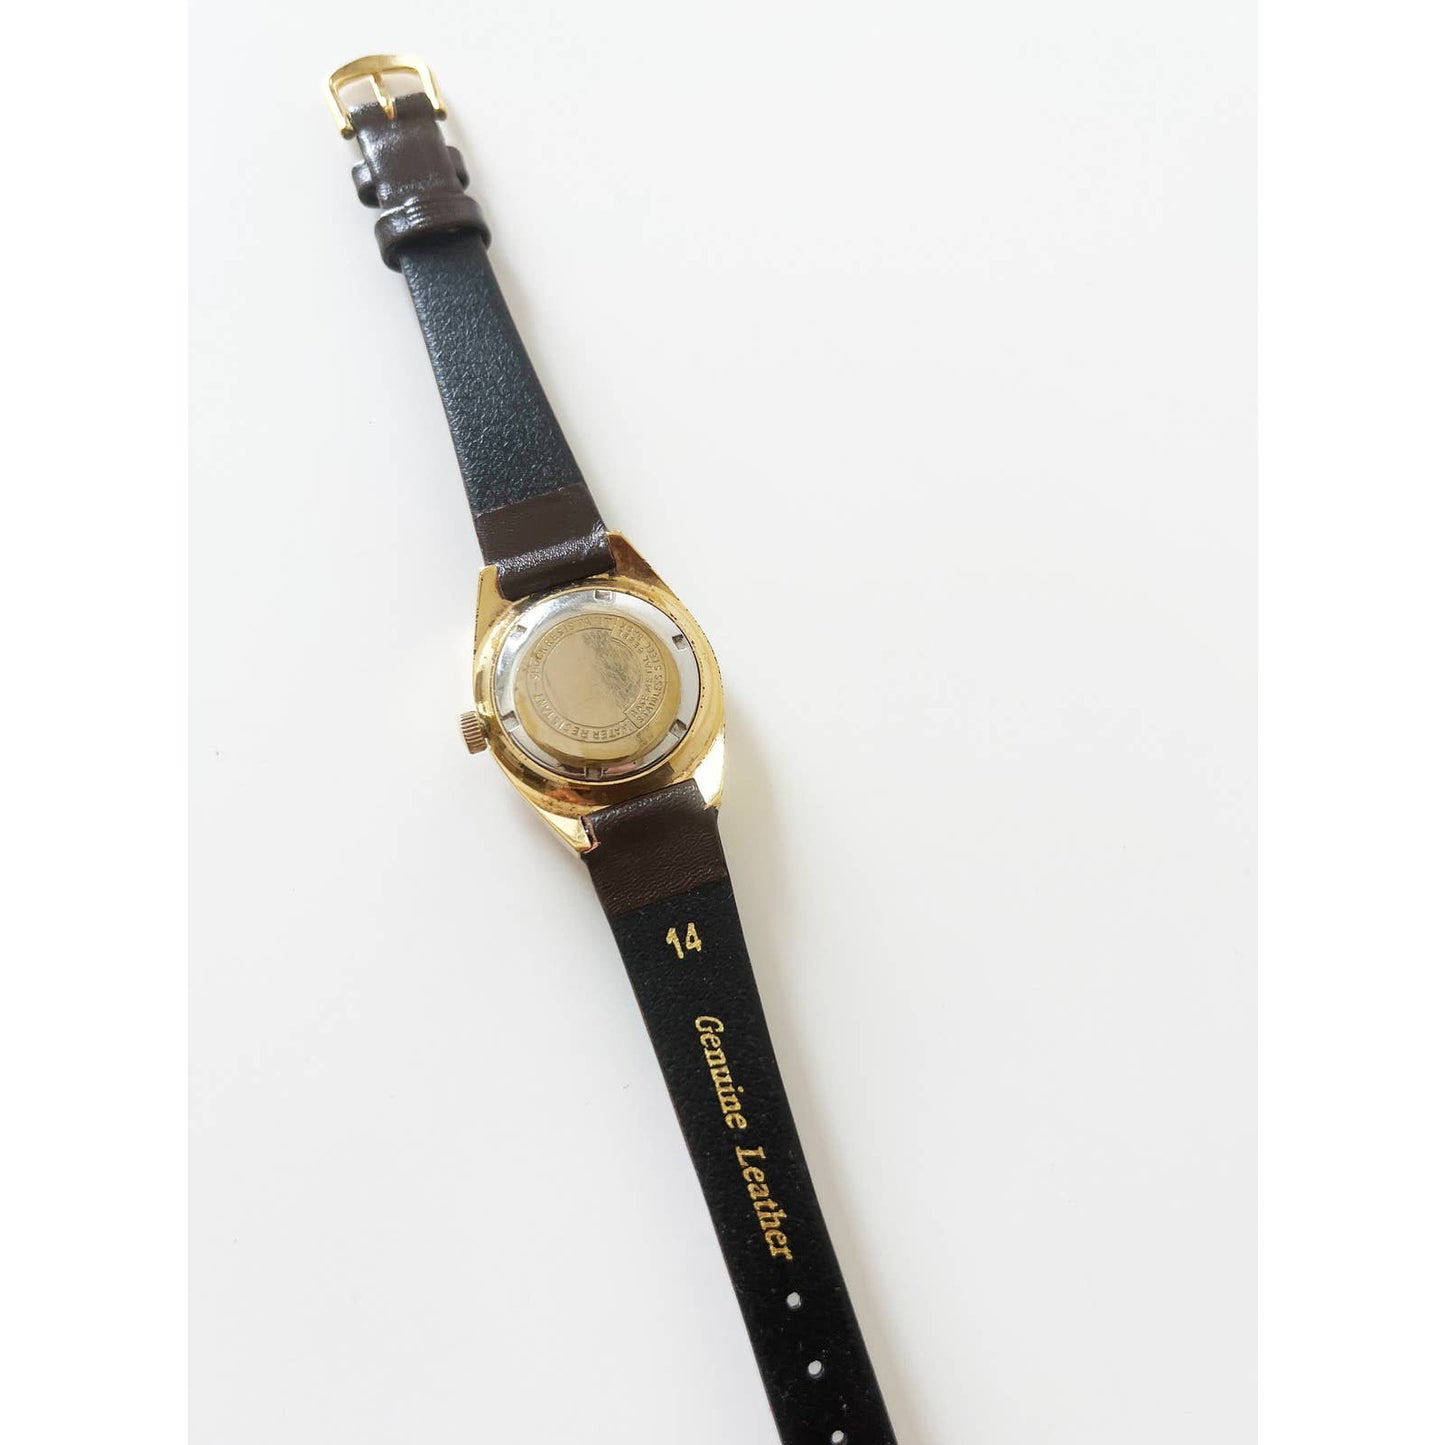 Vintage Leather Vantage Watch with Gold Details | Manual Wide with New Leather Band